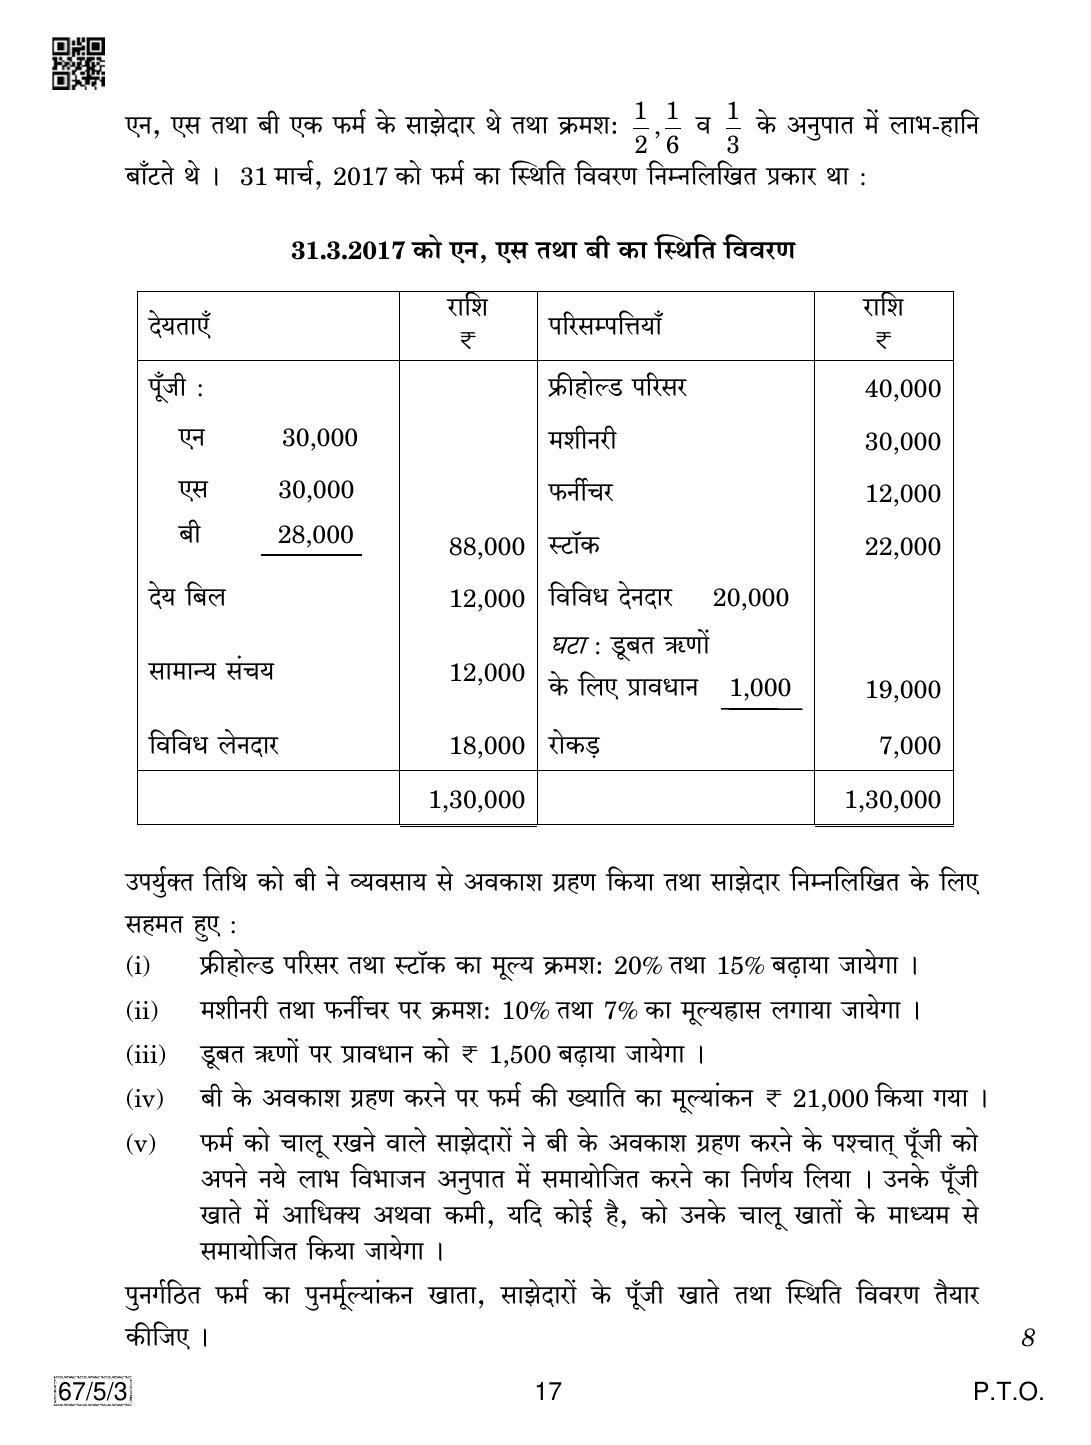 CBSE Class 12 67-5-3 Accountancy 2019 Question Paper - Page 17